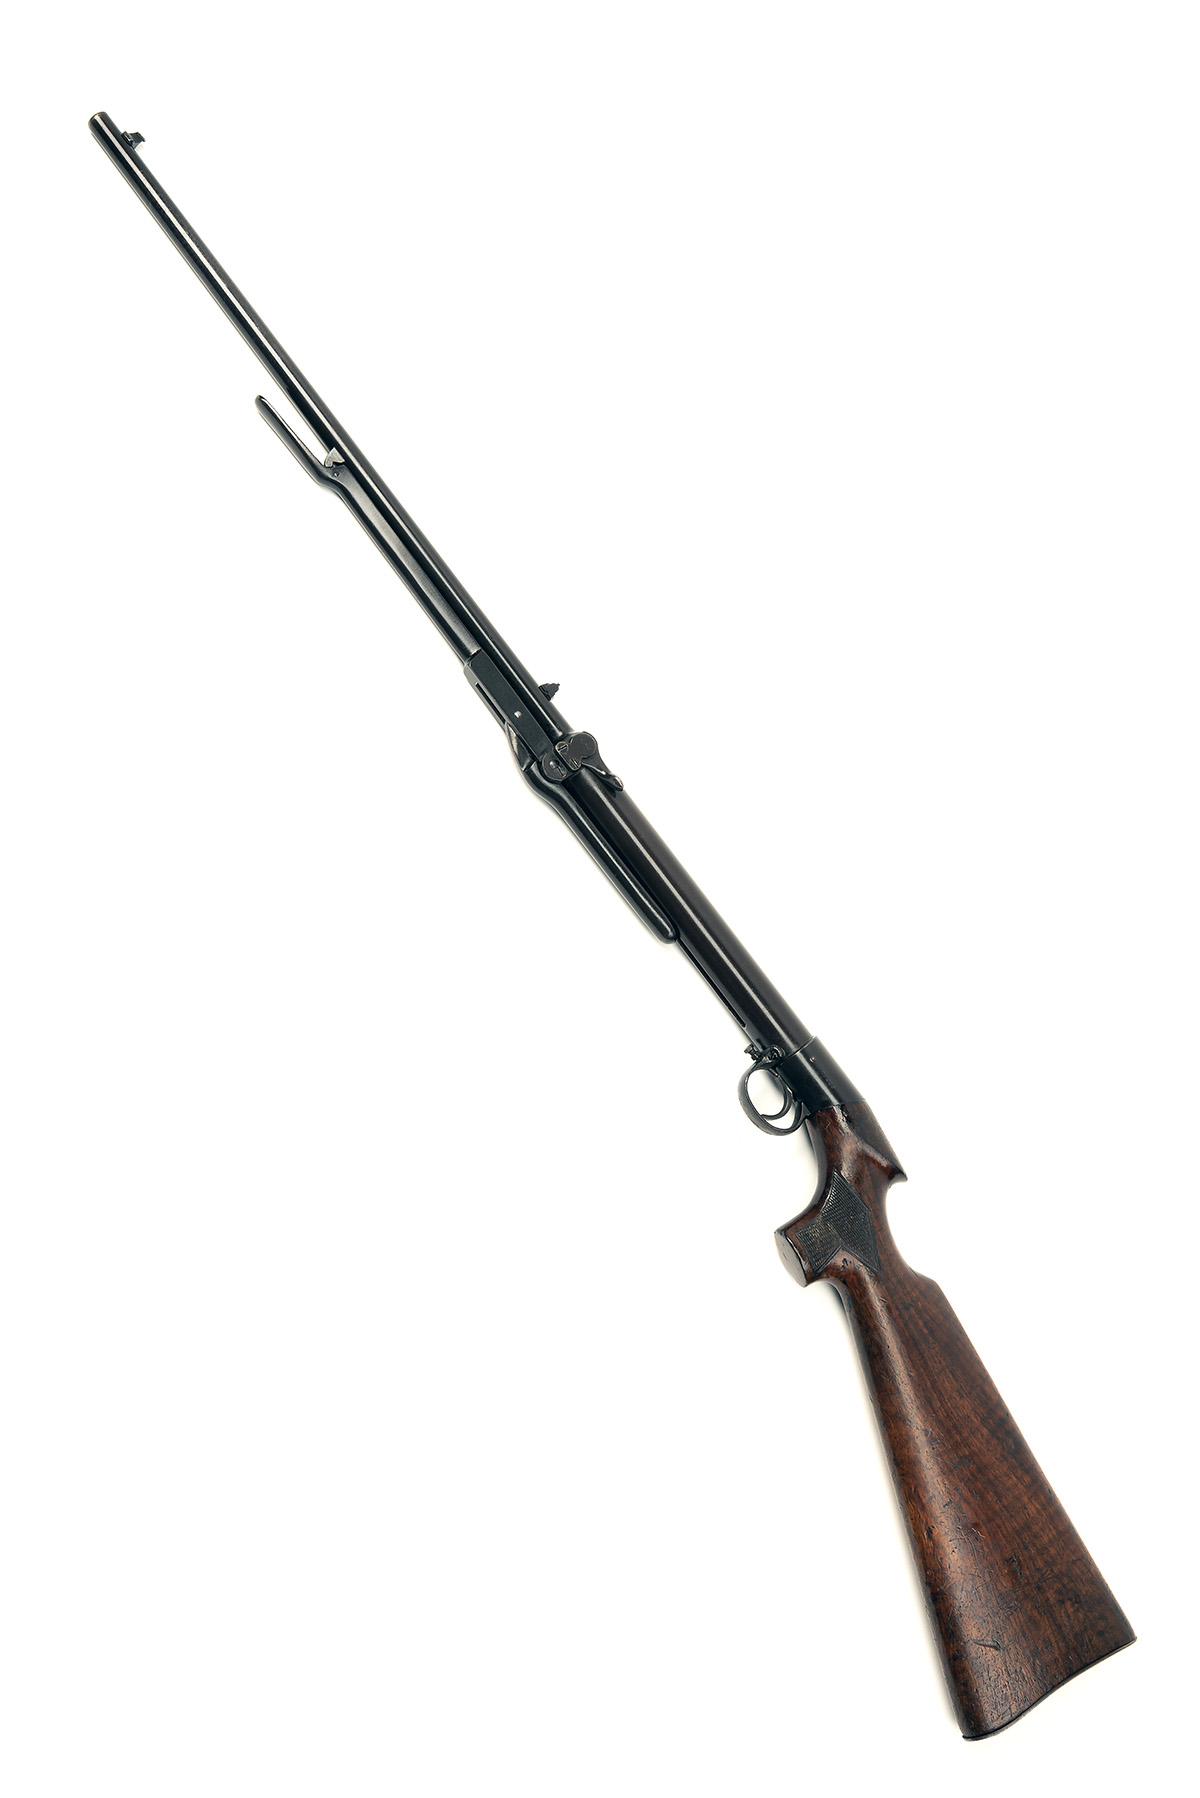 A RARE .177 PRESENTATION BSA UNDER-LEVER IMPROVED MODEL 'B' AIR-RIFLE, serial no. 17205, for 1907/8, - Image 10 of 10